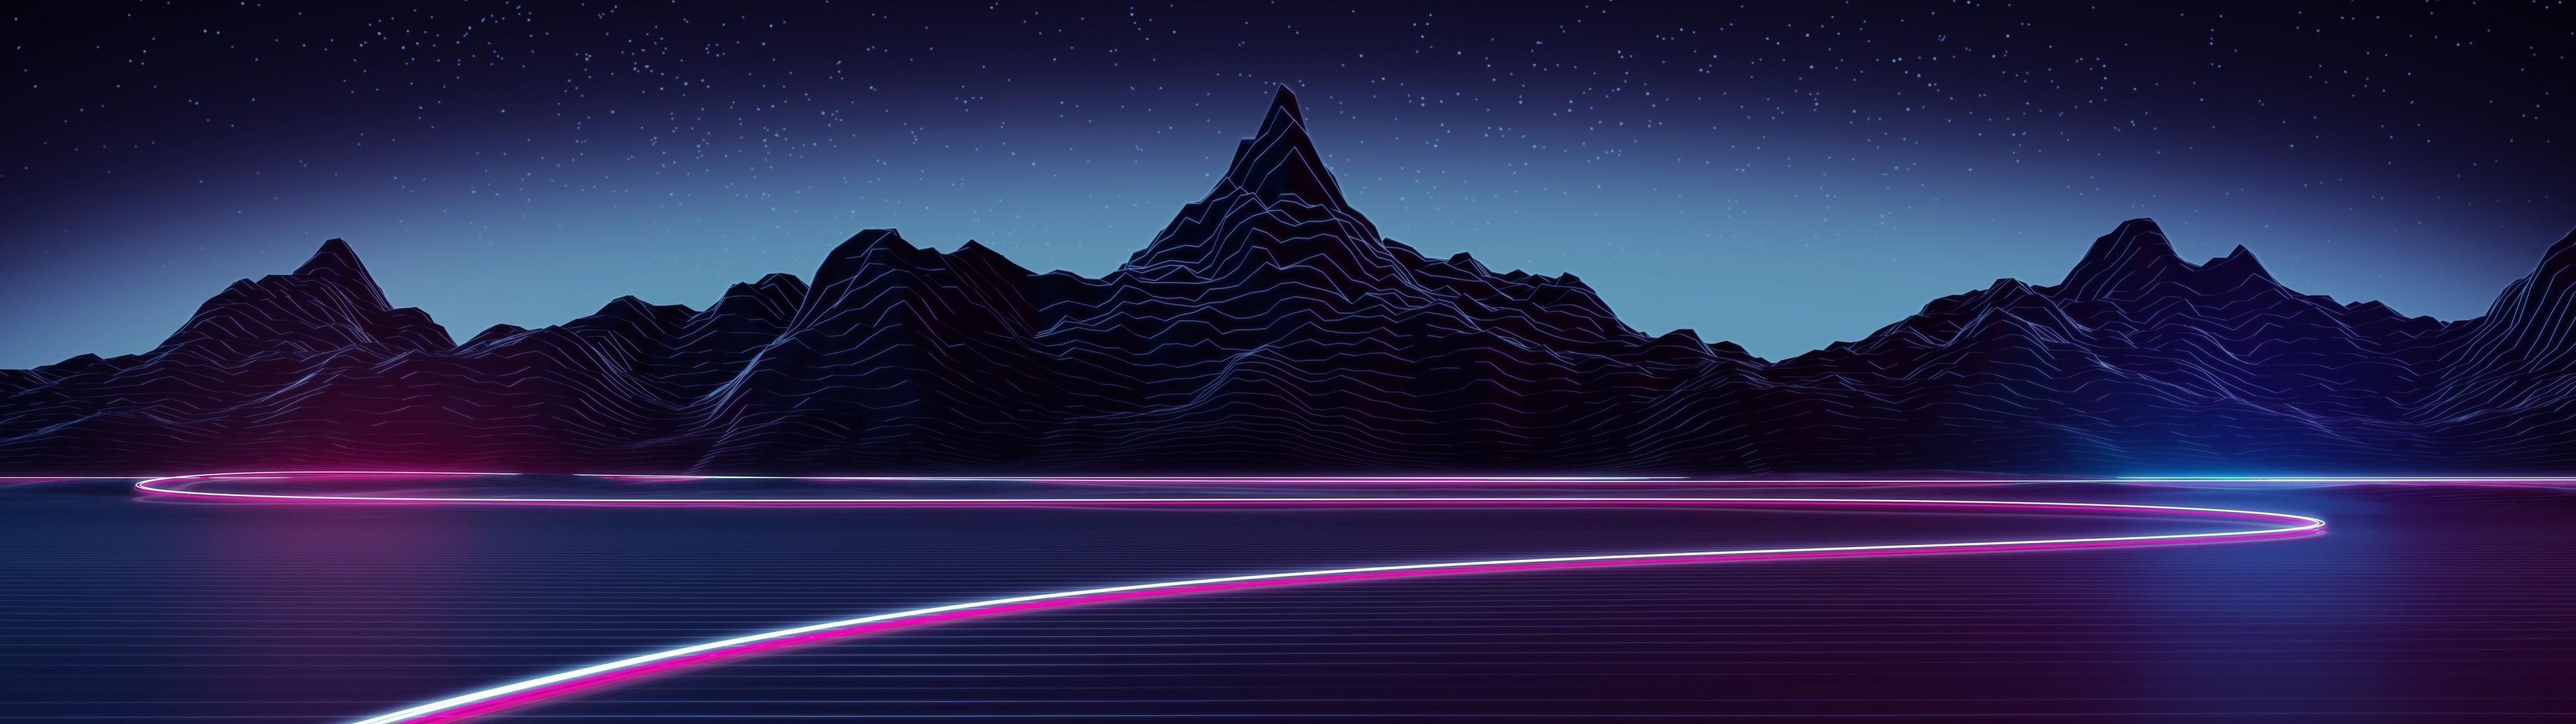 Download 3840x1080 Synthwave, Landscape, Neon Light, Mountain